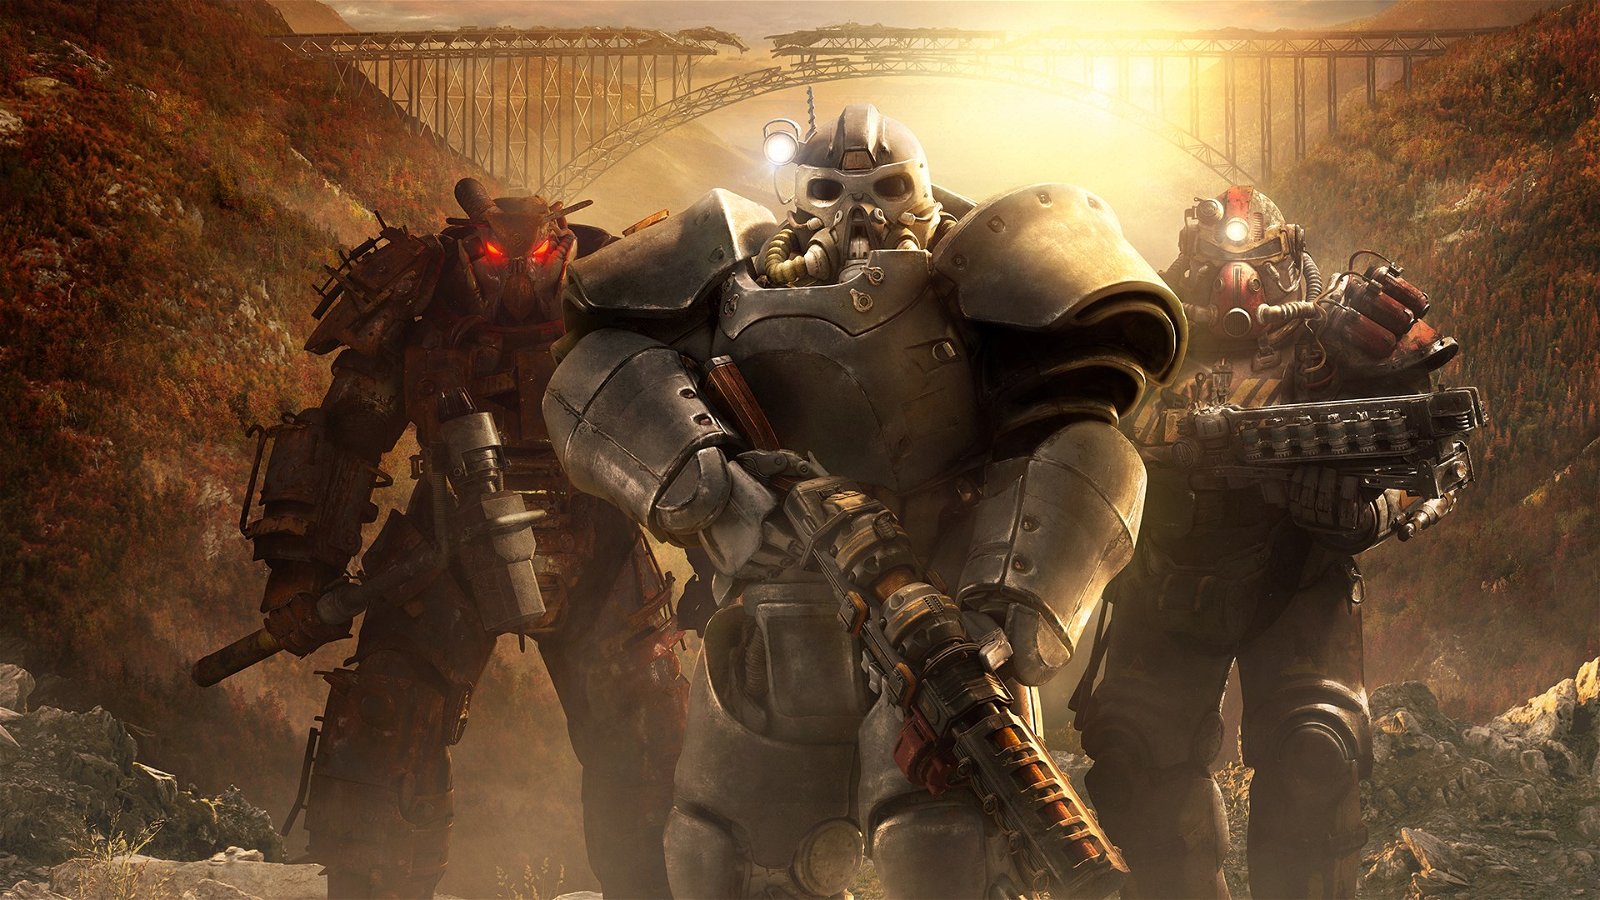 Fallout Web Series Coming From Amazon Studios